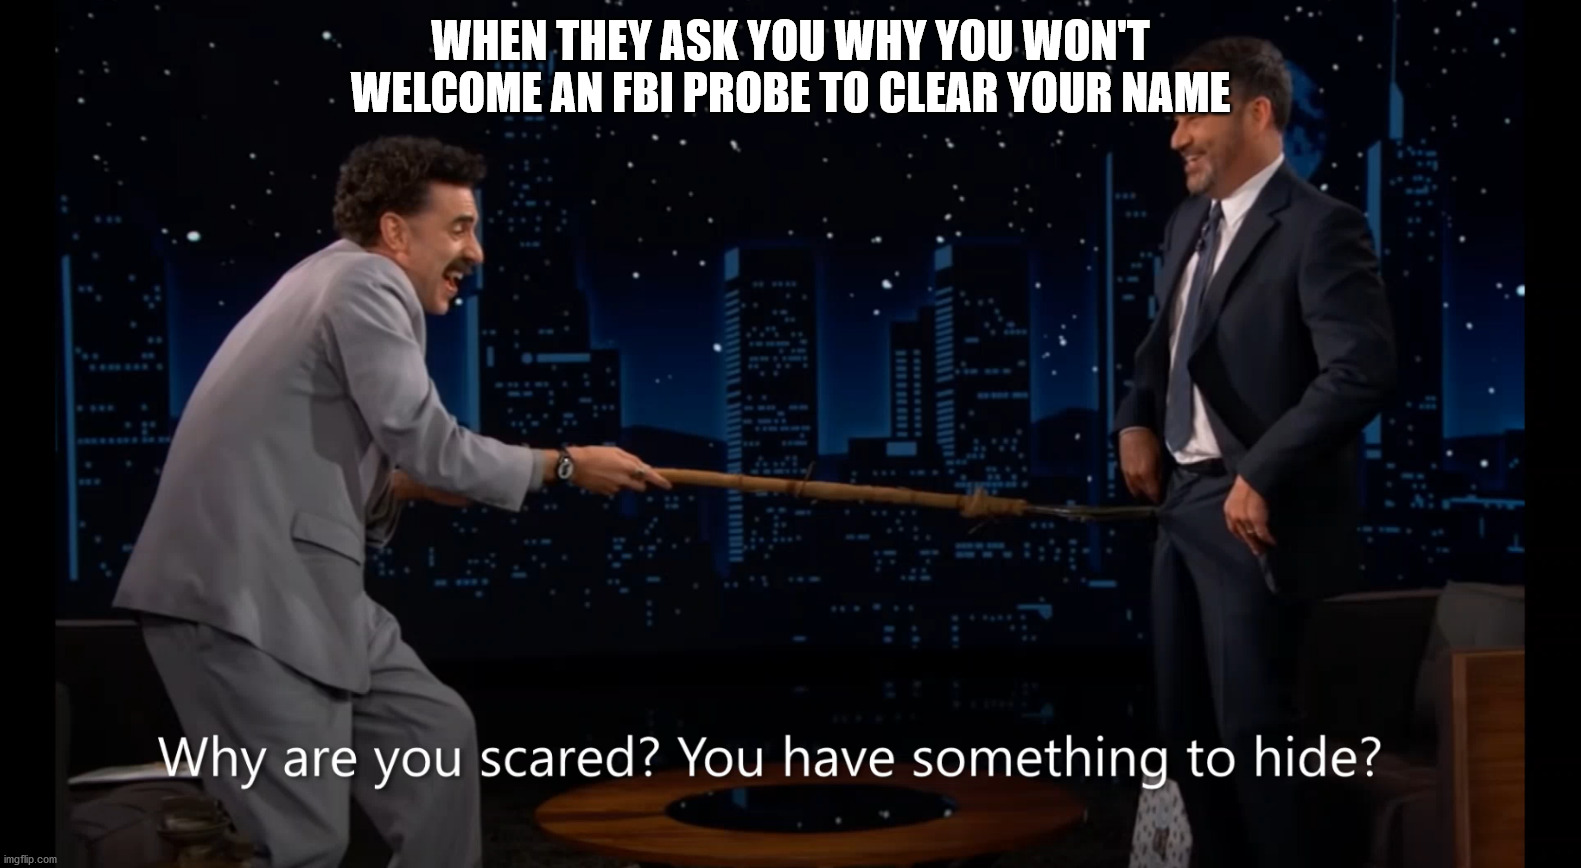 Probe | WHEN THEY ASK YOU WHY YOU WON'T WELCOME AN FBI PROBE TO CLEAR YOUR NAME | image tagged in fbi,jimmy kimmel,borat,probe | made w/ Imgflip meme maker